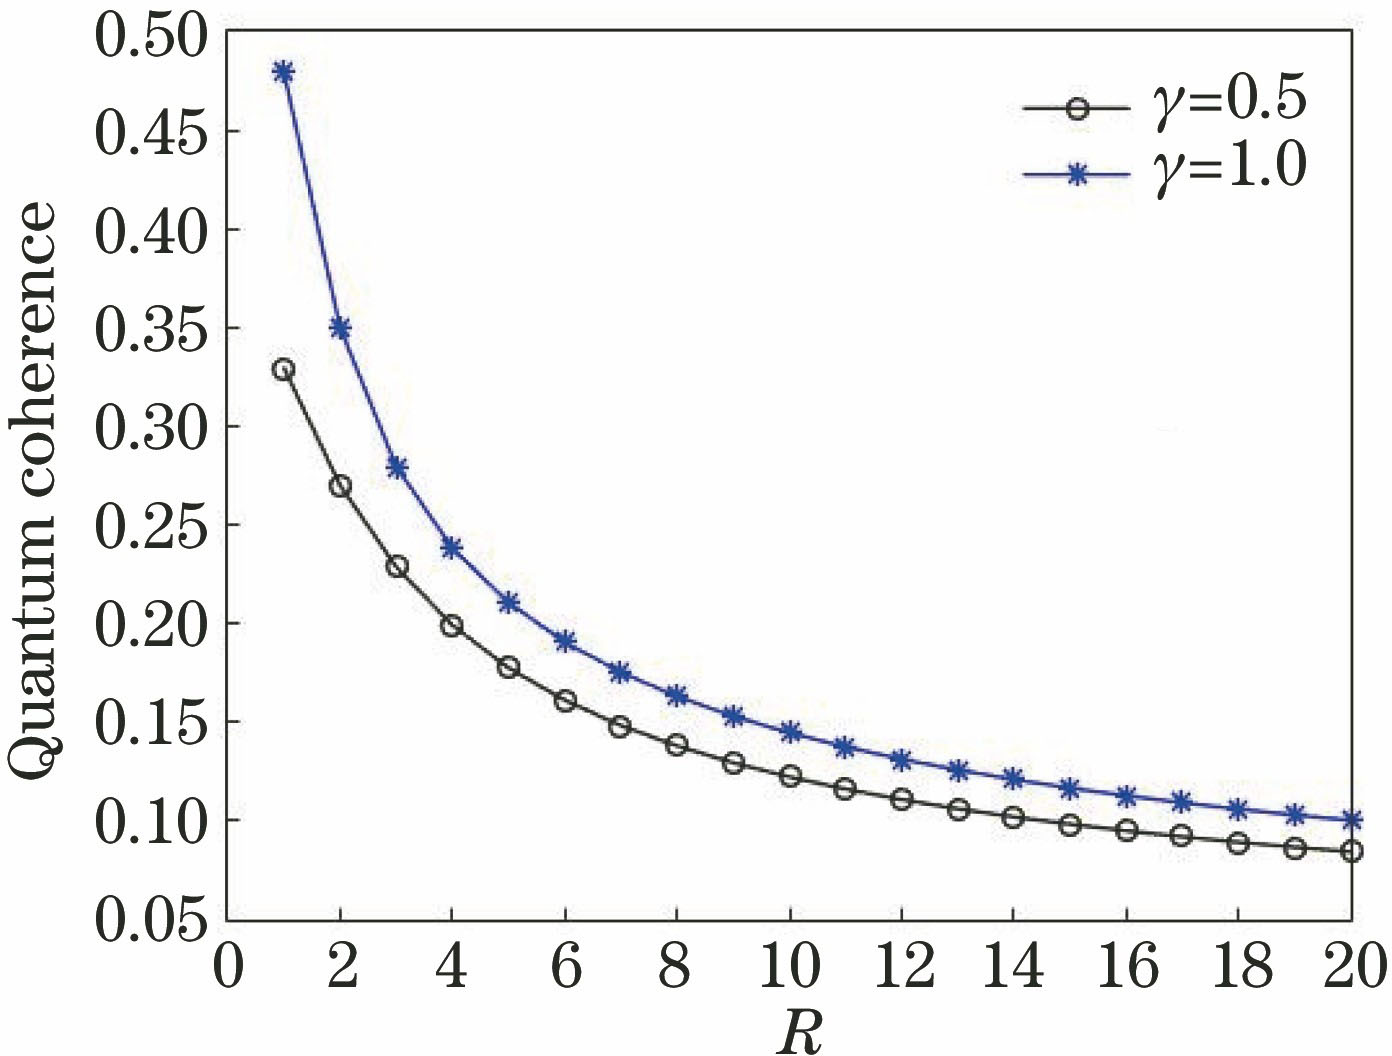 Quantum coherence as a function of R when effective magnetic field is at critical point (λ=1)